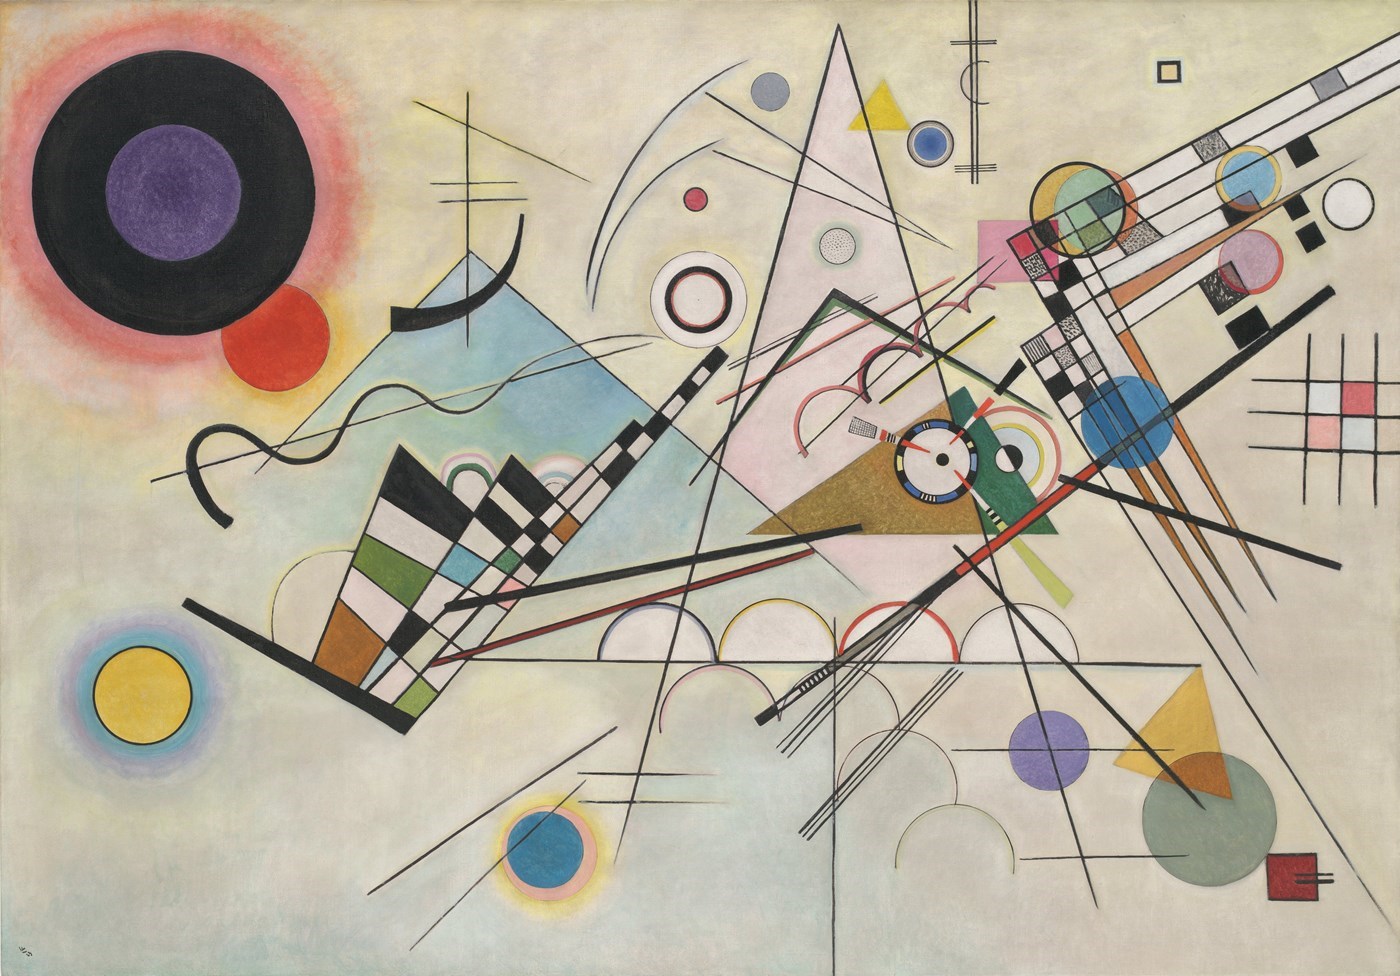 One of Kandinsky's iconic colourful abstract pieces